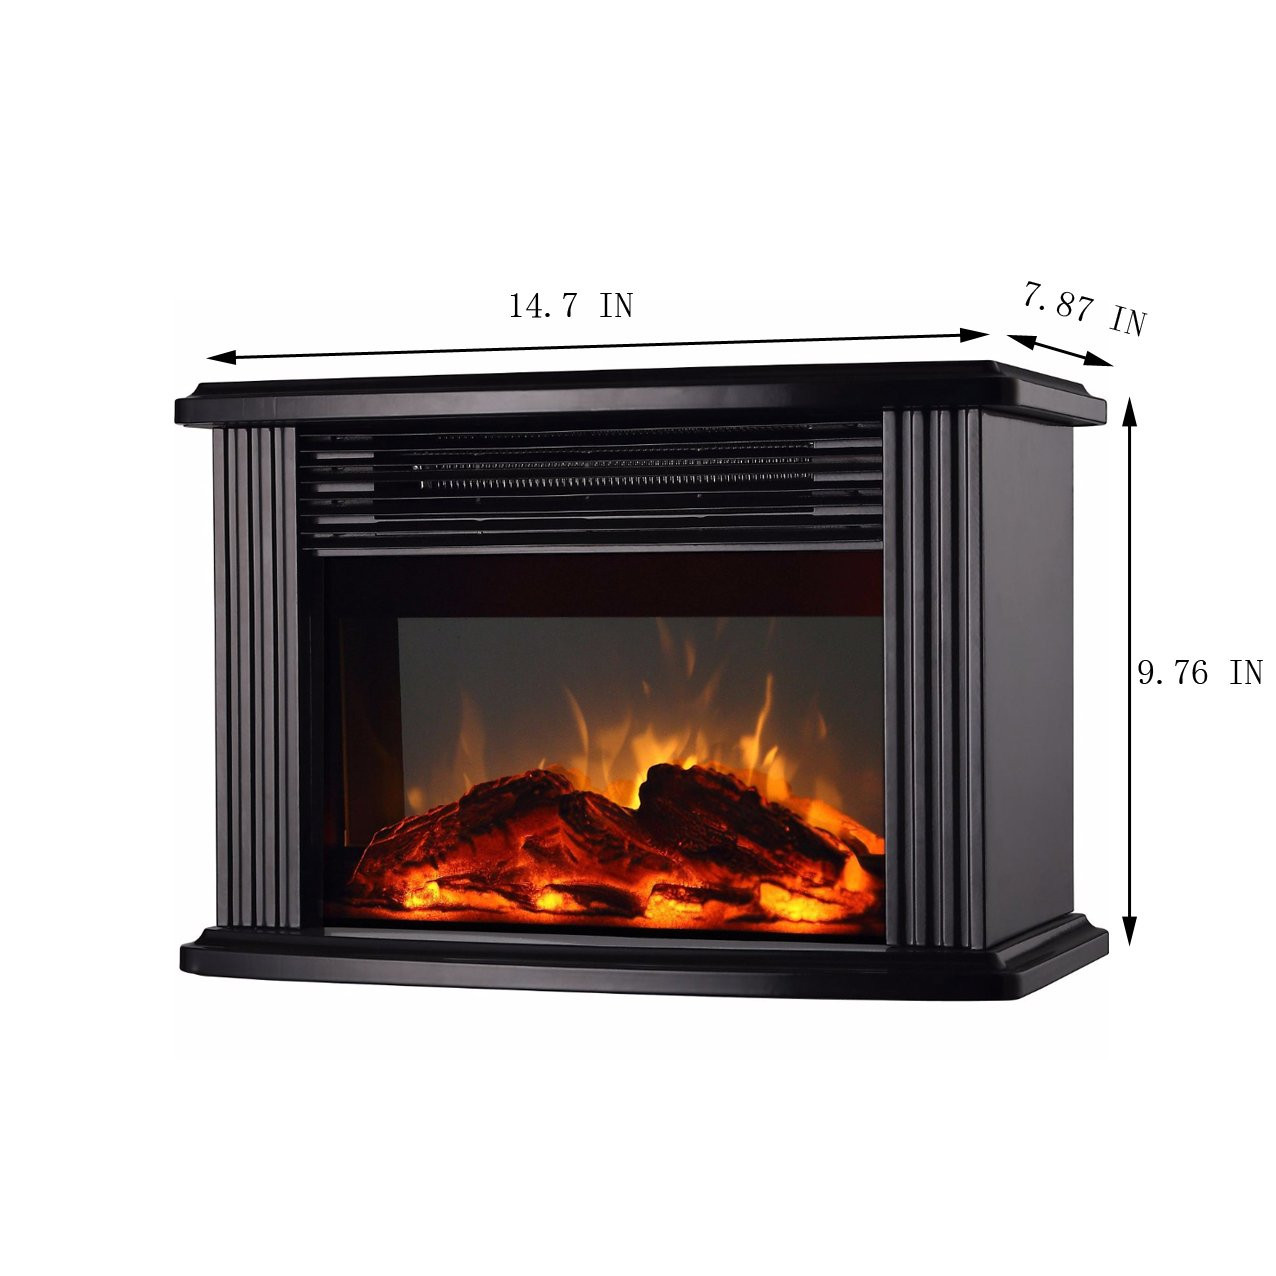 Table Top Electric Fireplace
 21 Cute Table top Electric Fireplace Home Family Style